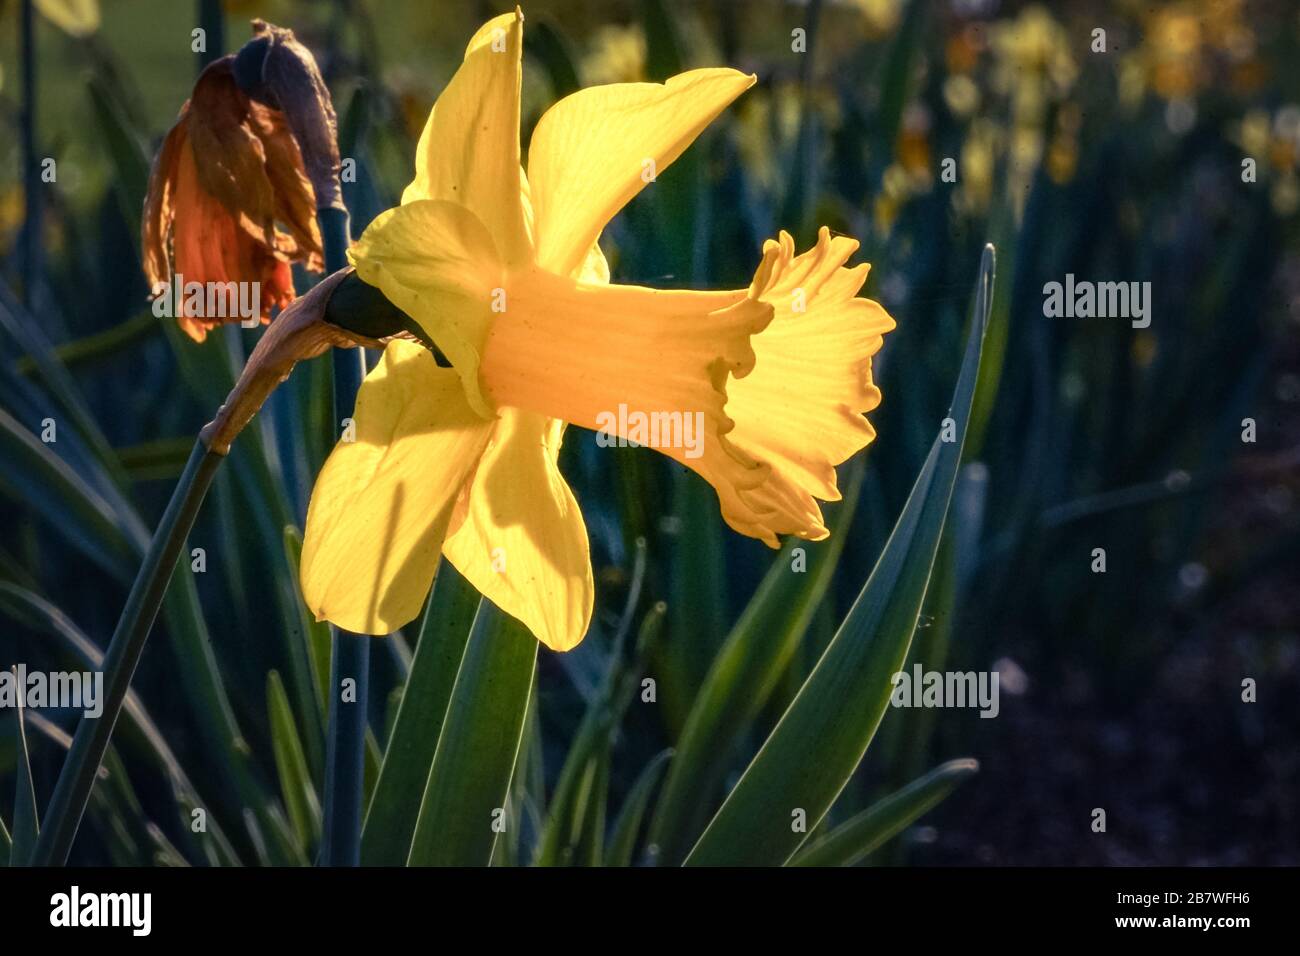 Yellow daffodil blossom in a flower bed looking transparent from backlight Stock Photo